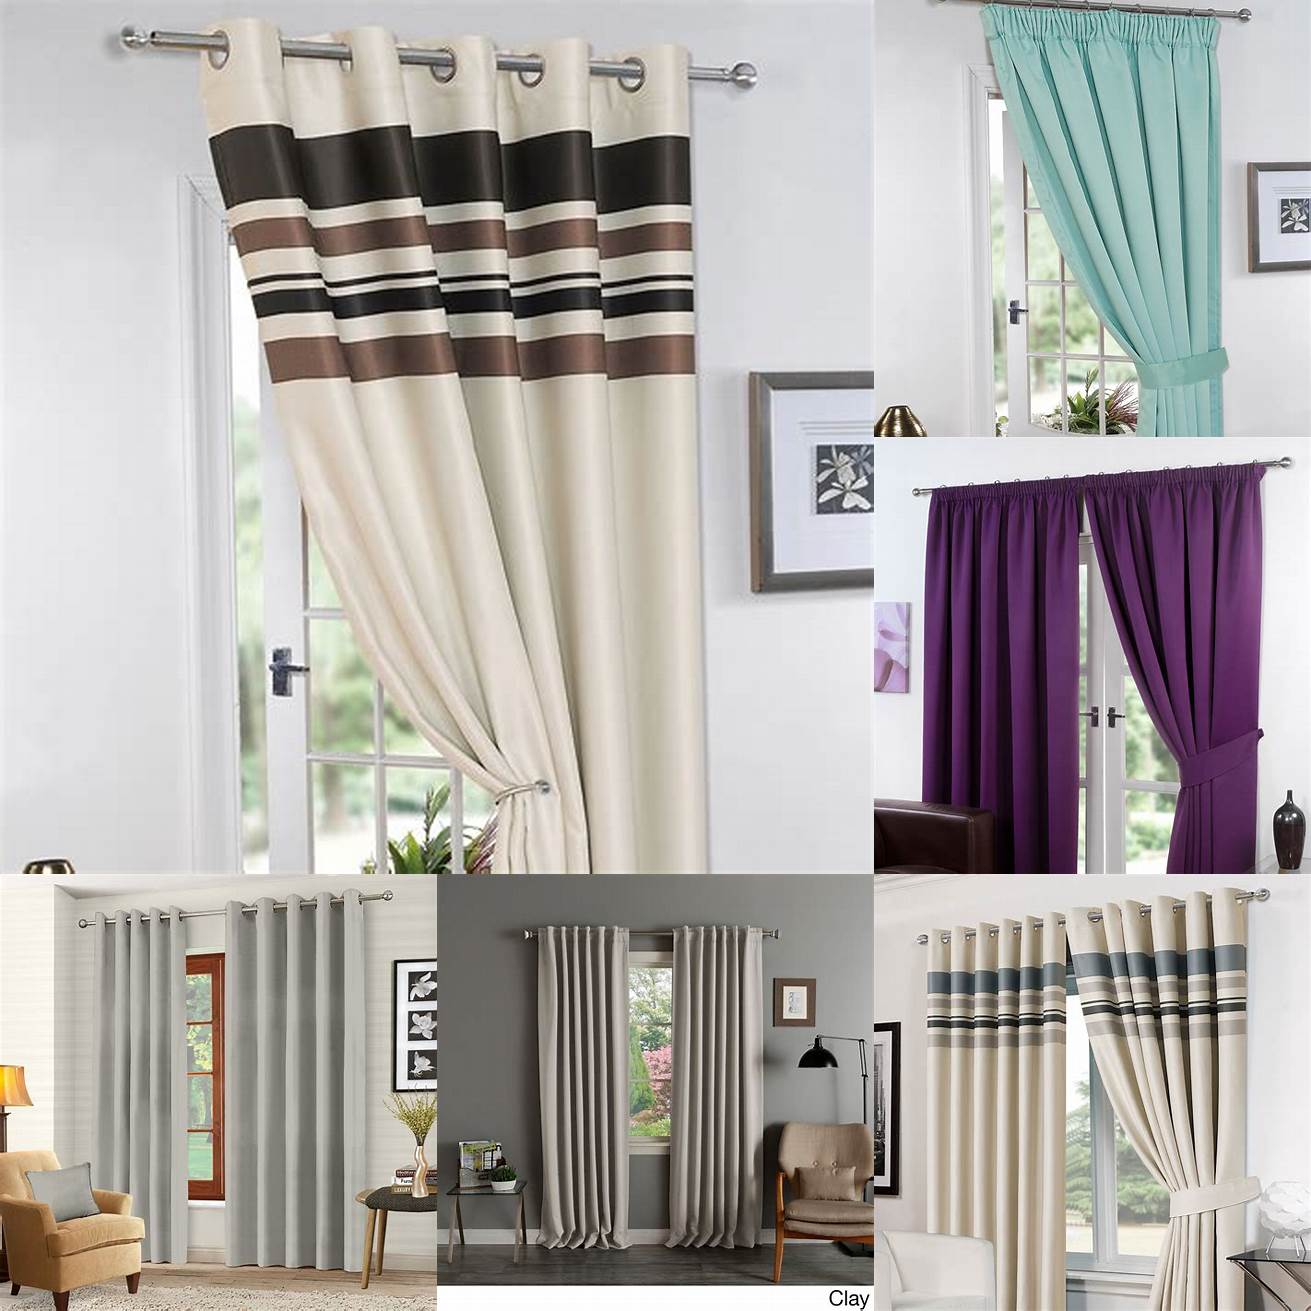 5 Blackout curtains with tiebacks